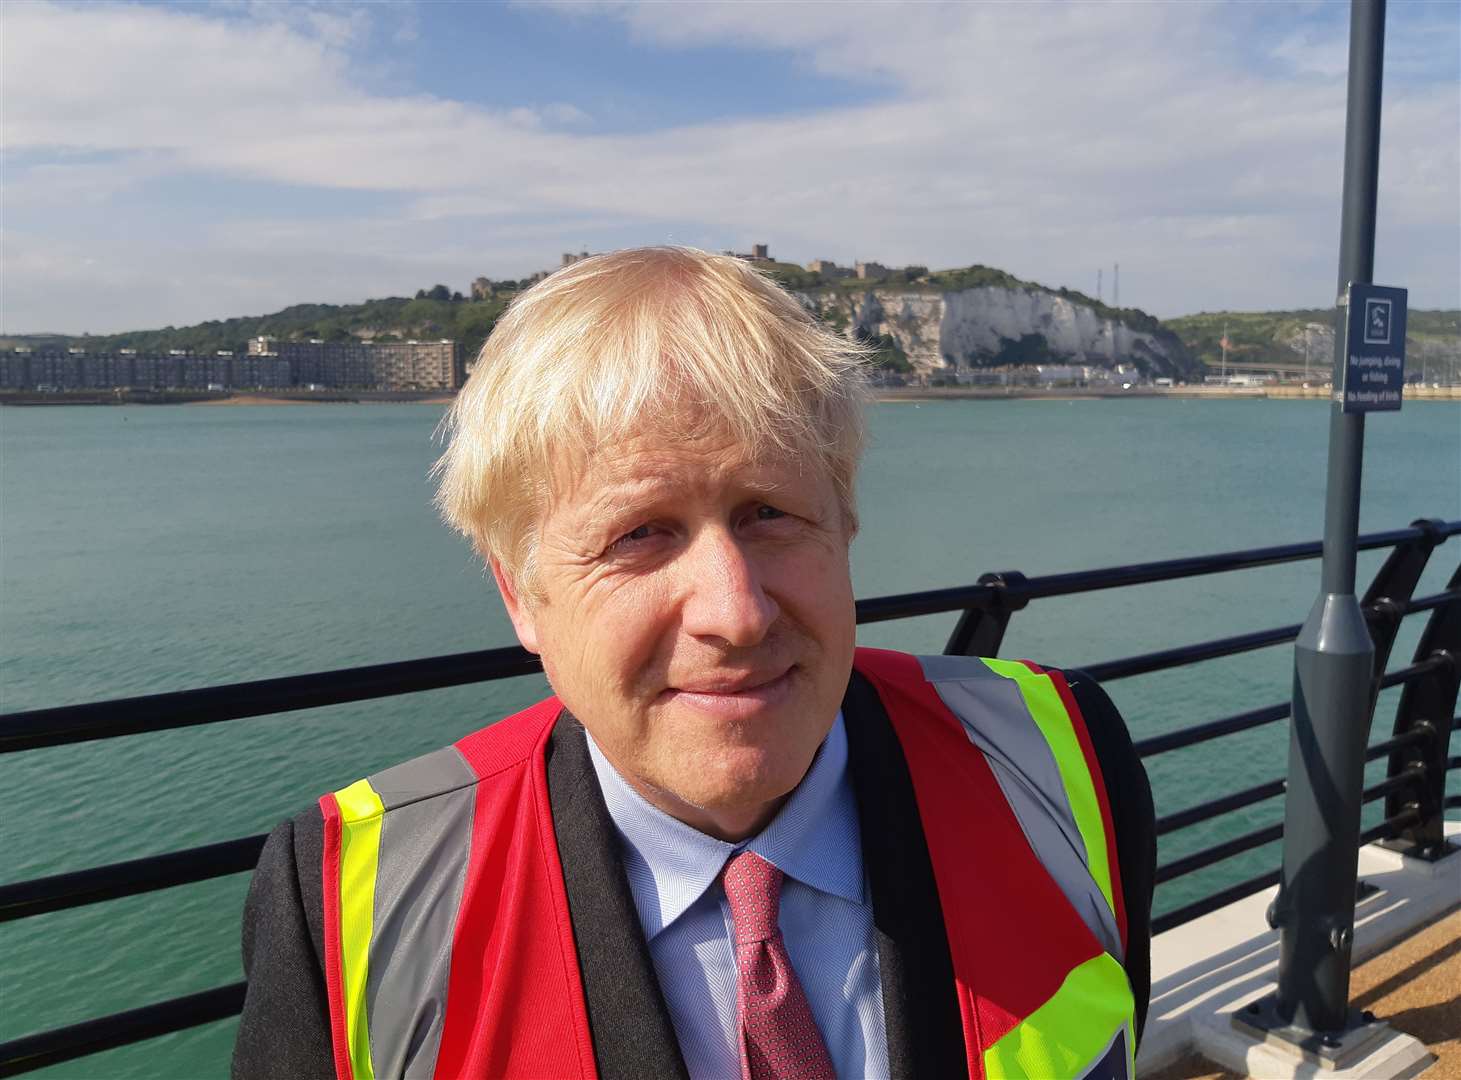 Boris Johnson in Dover before the recent Conservative leadership hustings event in Maidstone